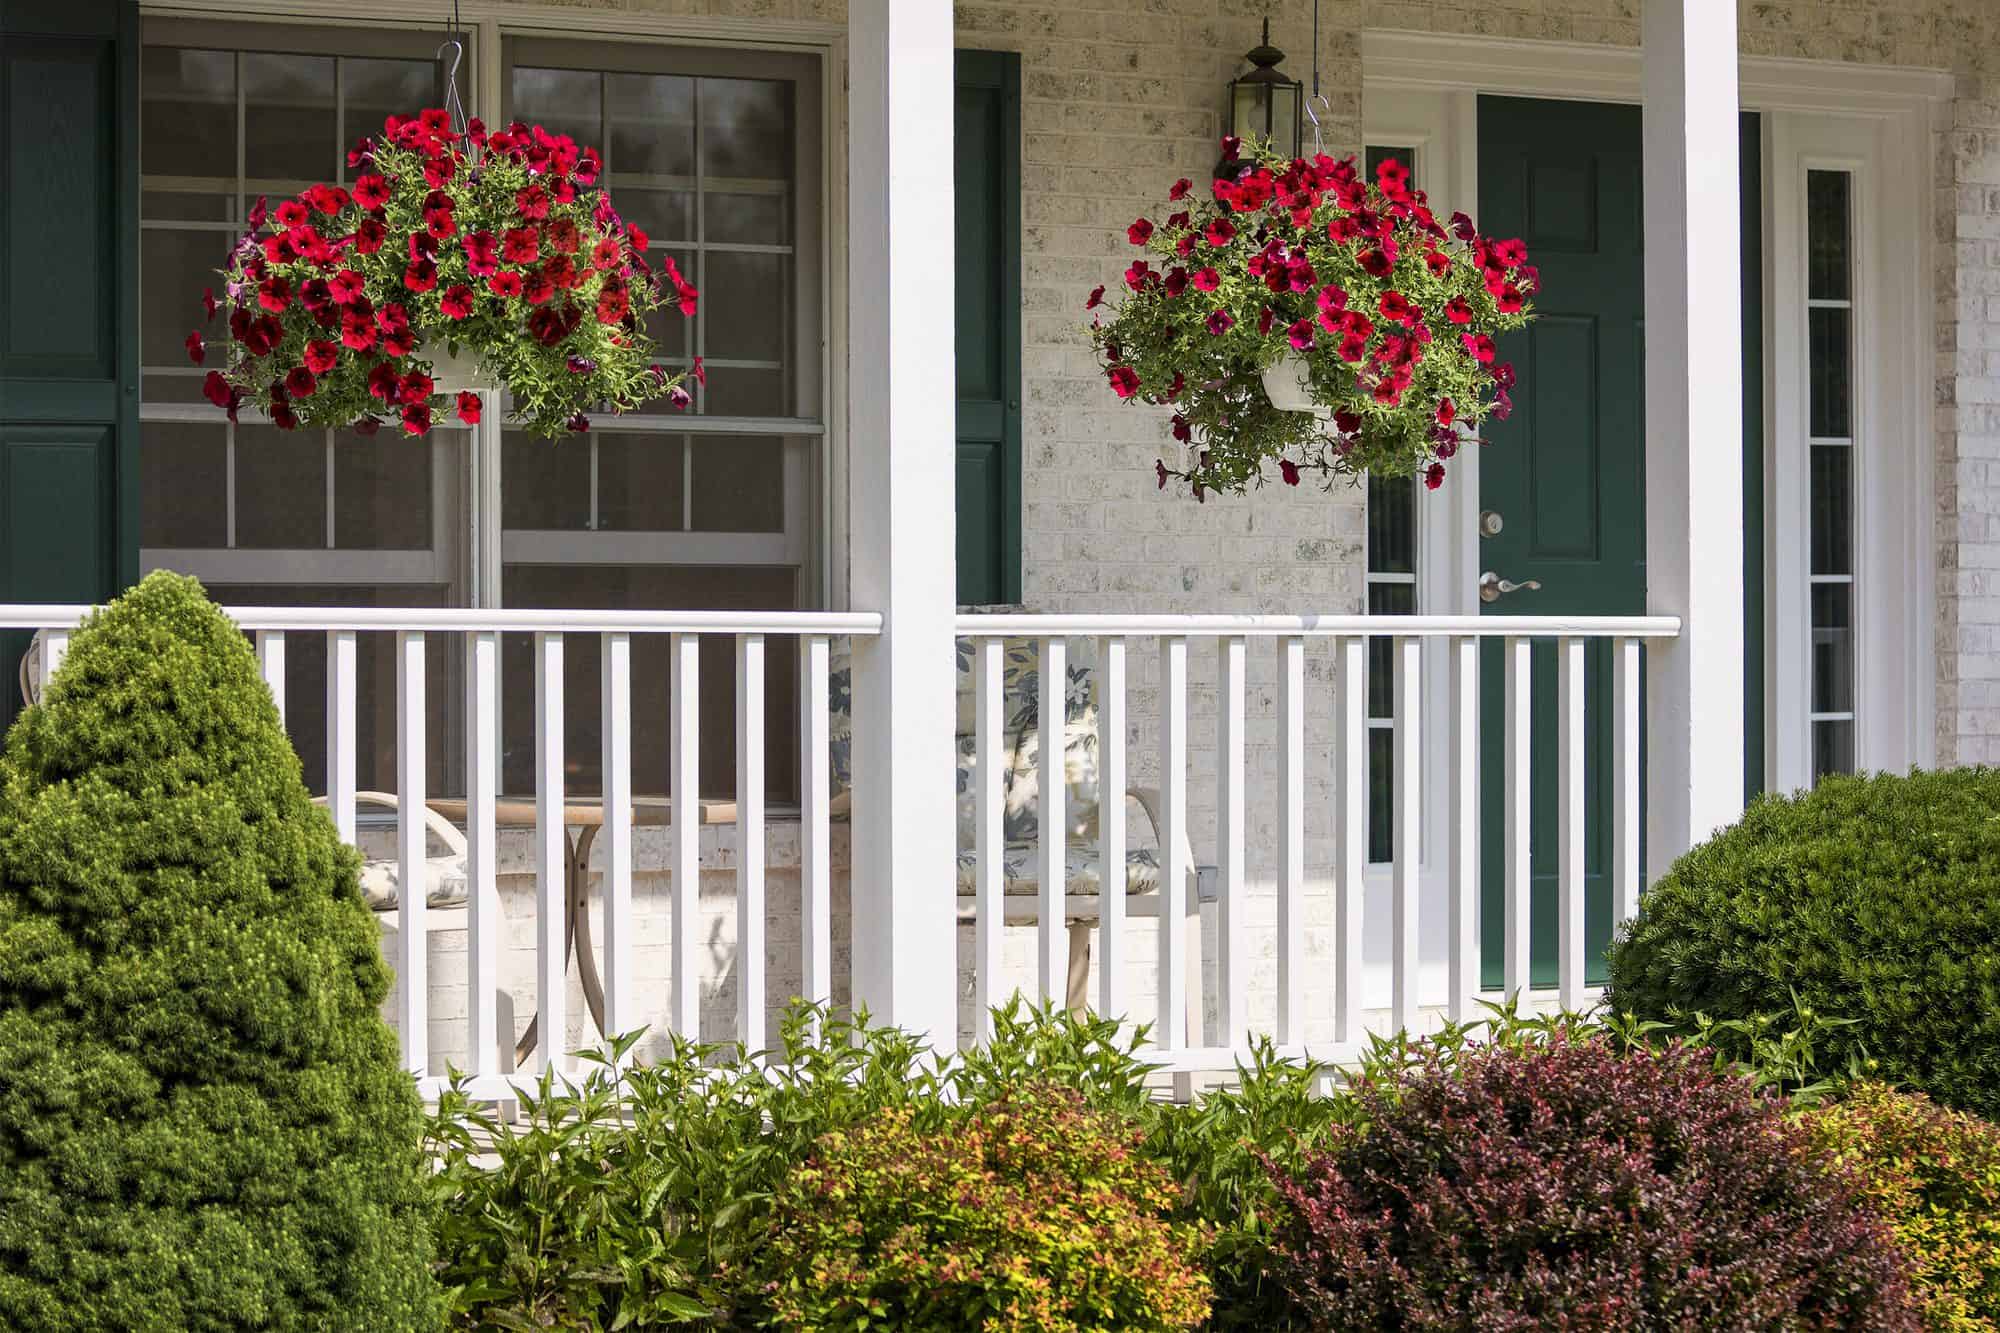 A beautiful landscaped American front porch with white railings and hanging baskets with red flowers.